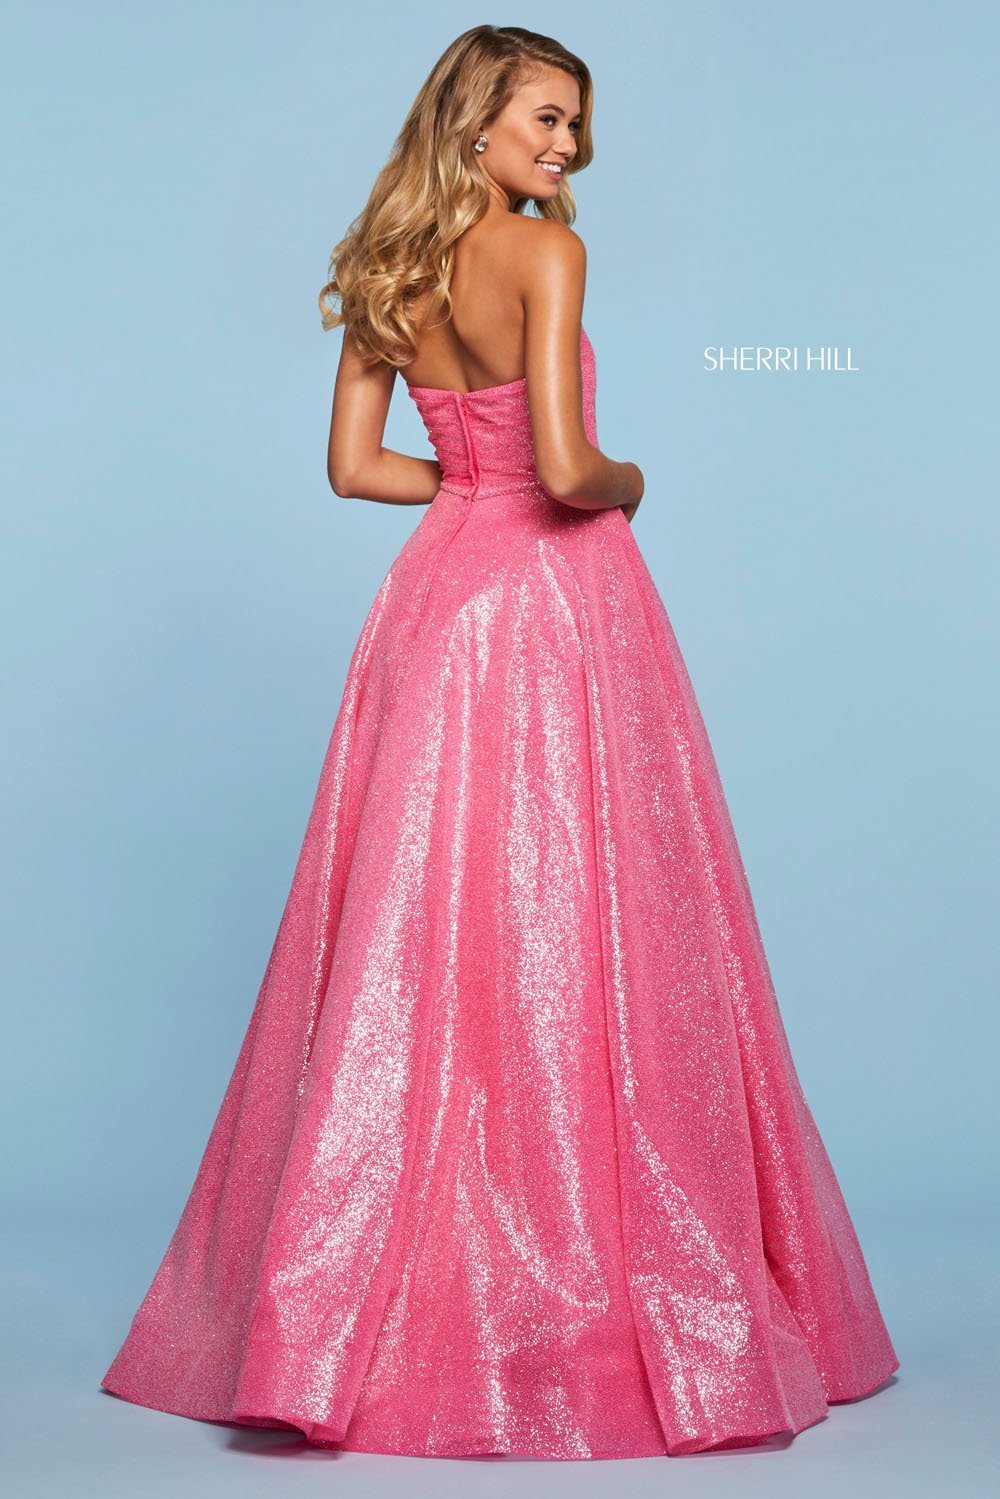 Sherri Hill 53419 dress images in these colors: Candy Pink, Ivory, Yellow, Light Pink.